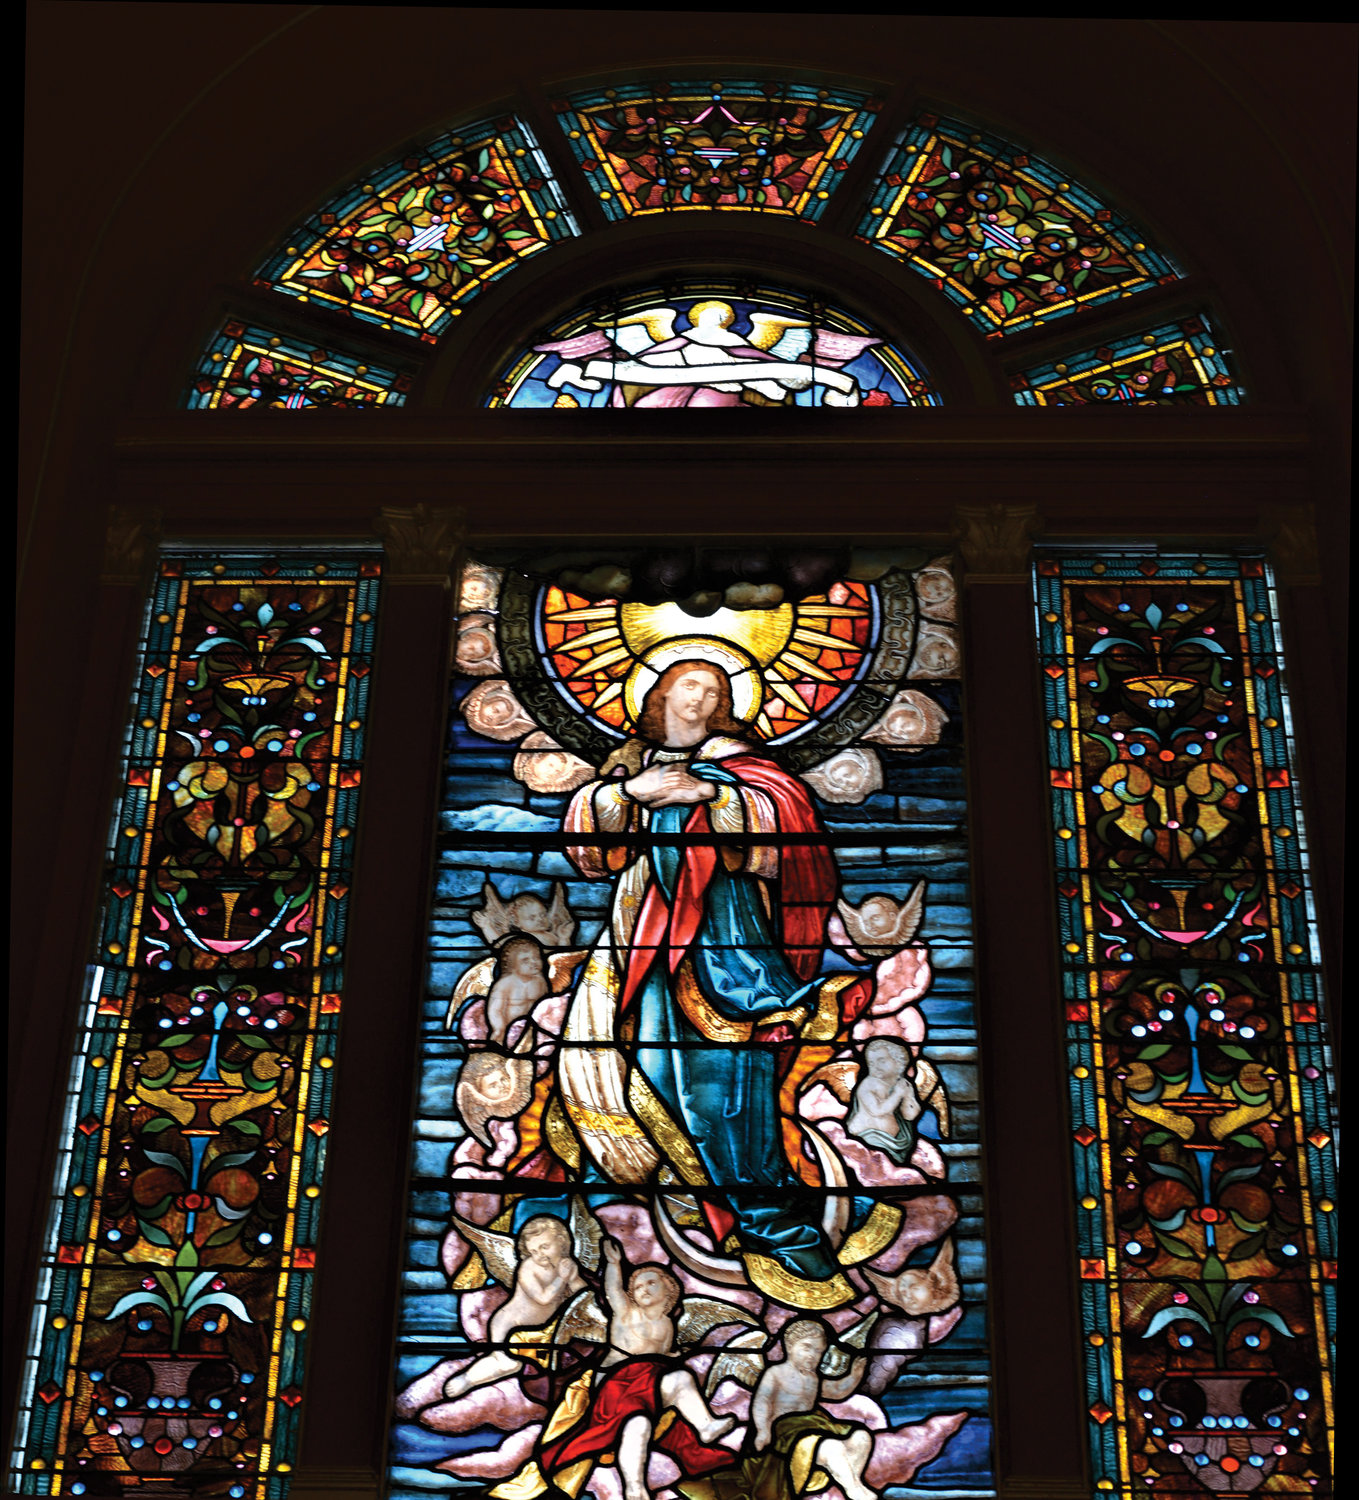 A magnificent stained-glass window is pictured in St. Mary’s Church on Grand Street in Lower Manhattan. The church was one of more than 80 houses of worship in New York state to participate in the Sacred Sites Open House presented by the New York Landmarks Conservancy July 23-24.